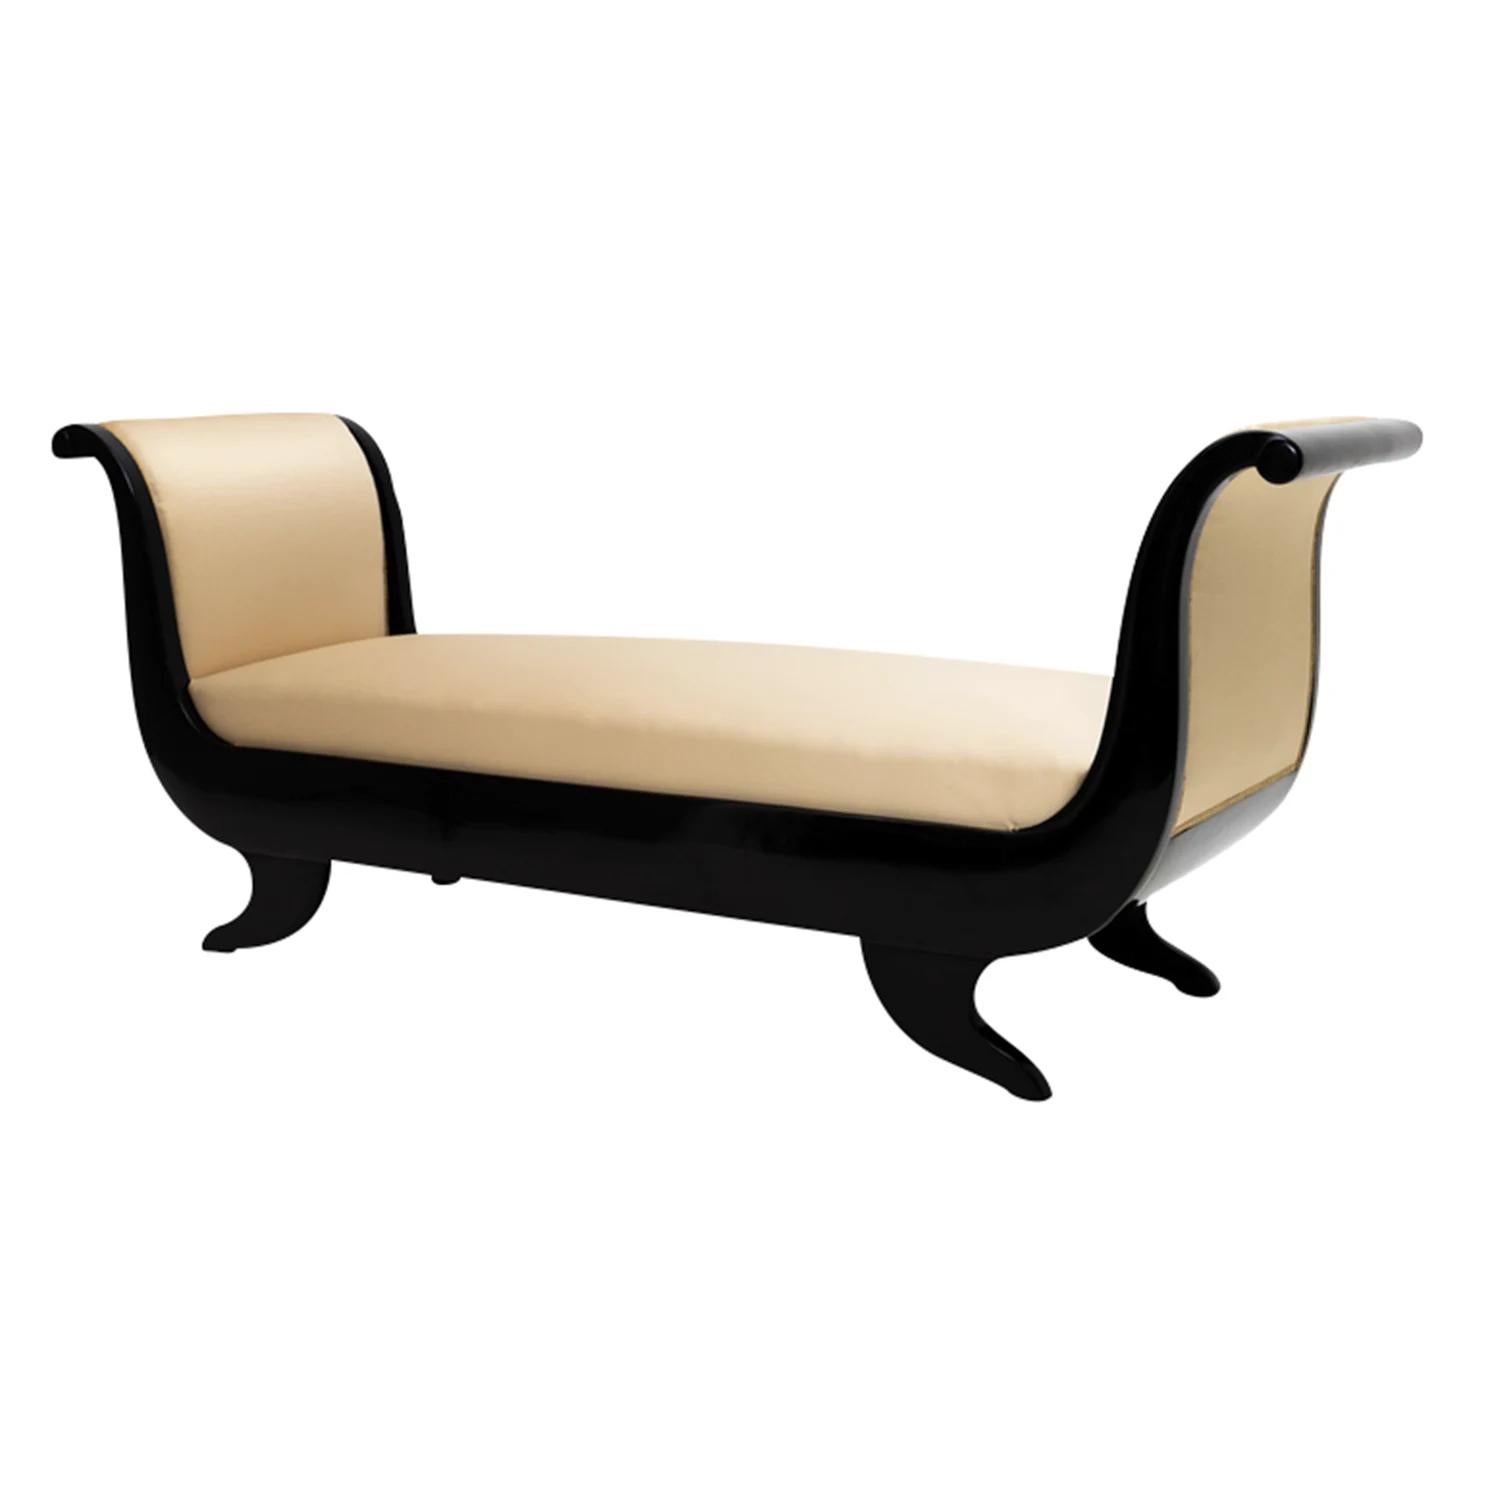 A black, antique French sofa bench-recamier made of hand crafted ebonized Mahogany, in good condition. The canapé is particularized by two side backrests, standing on four arched wooden feet. The settee represents the first French Empire time